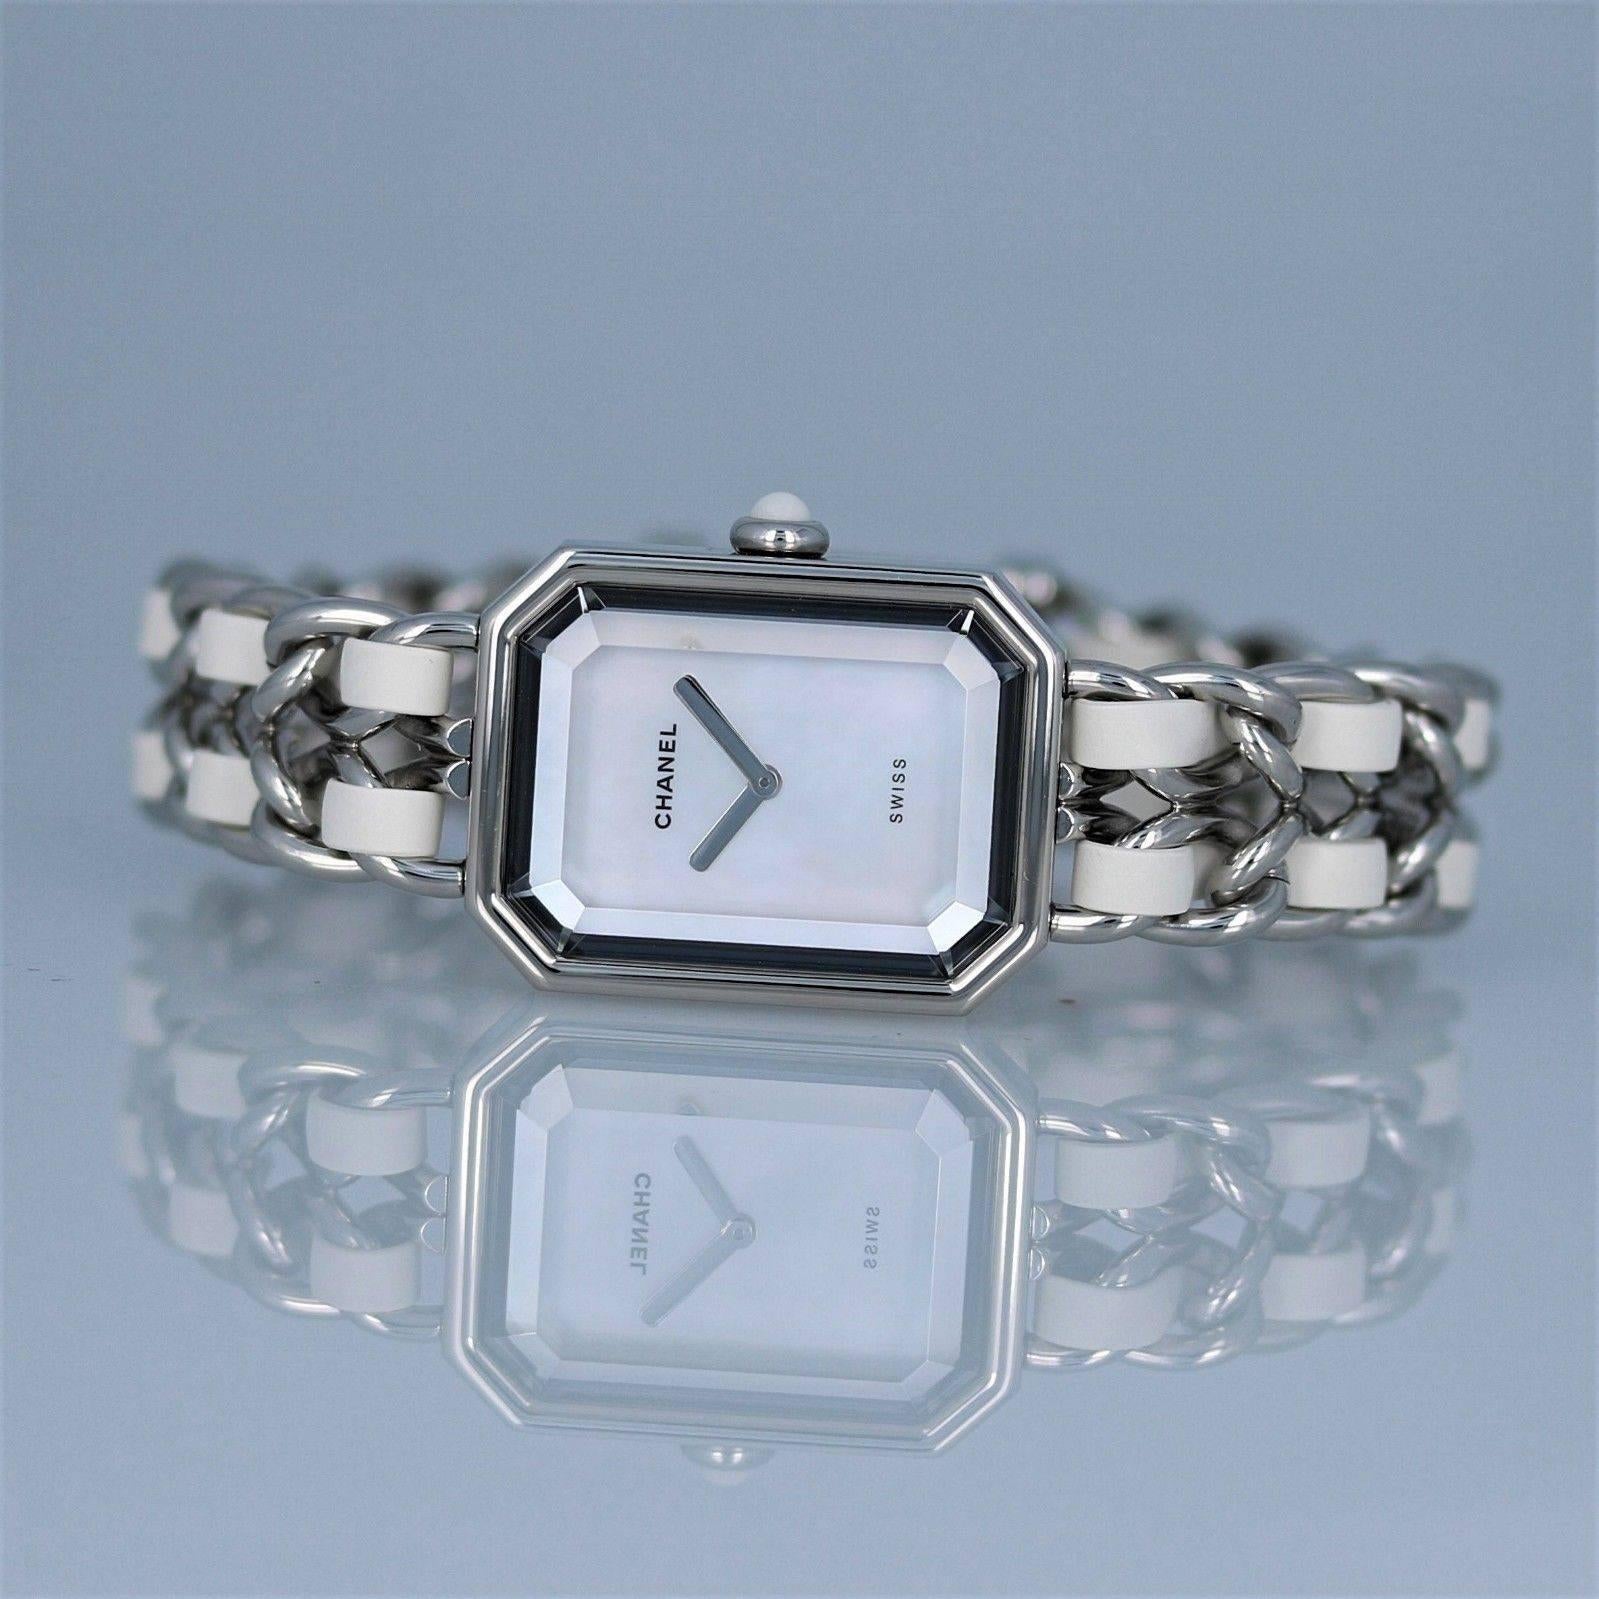 Women's or Men's Chanel Ladies Stainless Steel Premiere Mother-of-Pearl Dial Quartz Wristwatch